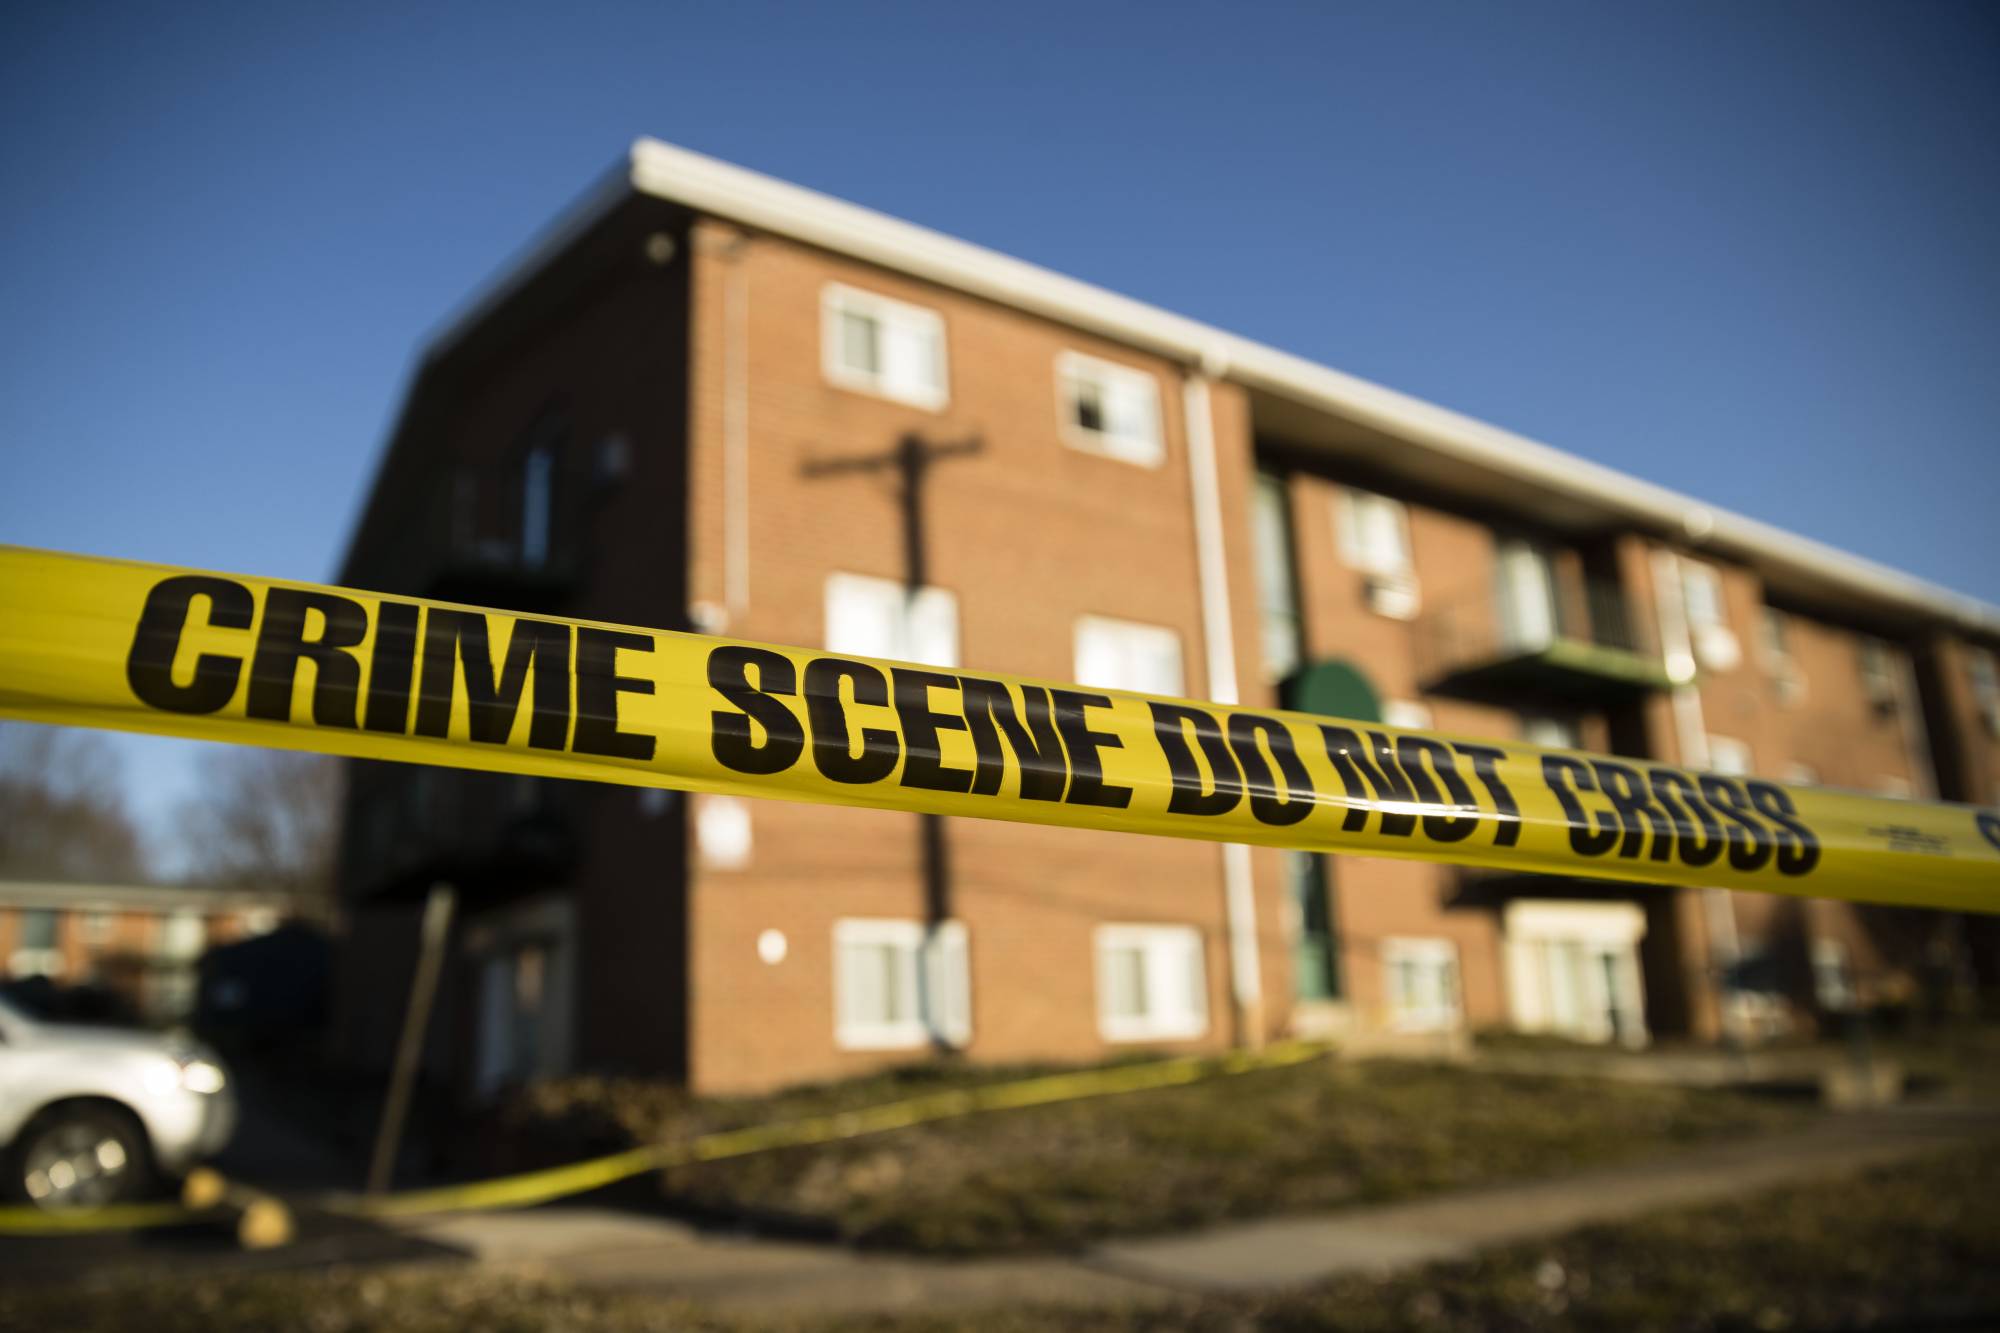 Crime scene tape surrounds the Robert Morris Apartments in Morrisville, Pa., Tuesday, Feb. 26, 2019. A woman and her teenage daughter are facing homicide charges in the deaths of multiple relatives, including children, inside an apartment at the complex in suburban Philadelphia, according to authorities. (AP Photo/Matt Rourke)